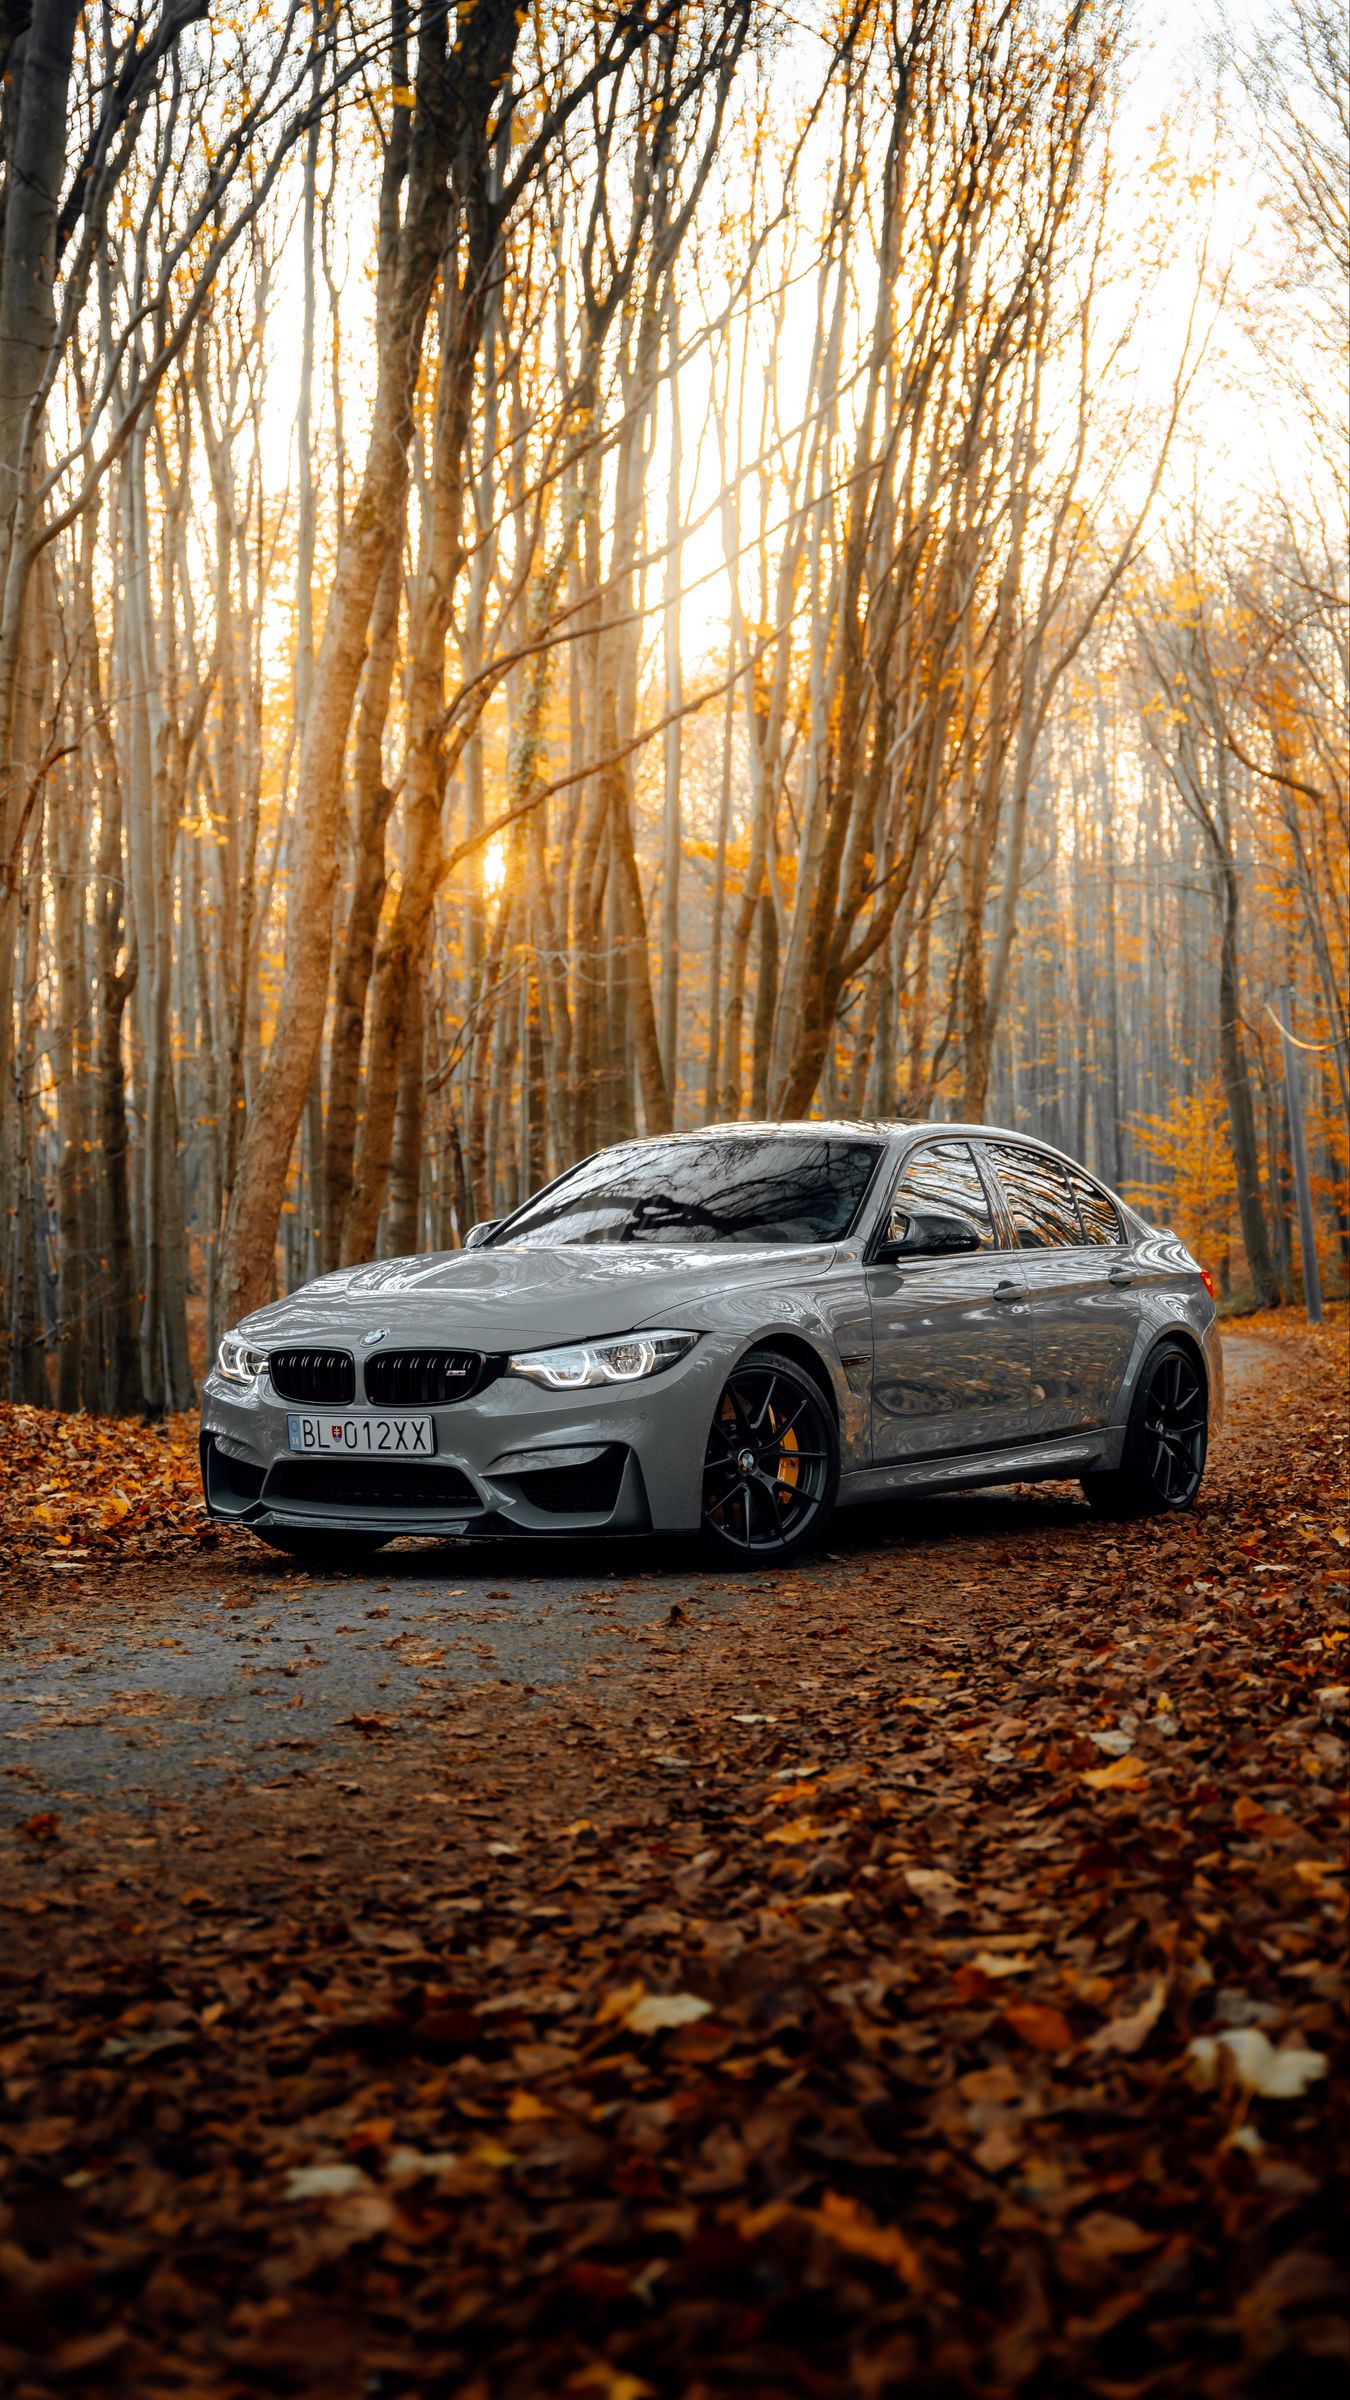 Download wallpaper 1350x2400 bmw m bmw, car, gray, side view, forest, autumn iphone 8+/7+/6s+/for parallax HD background